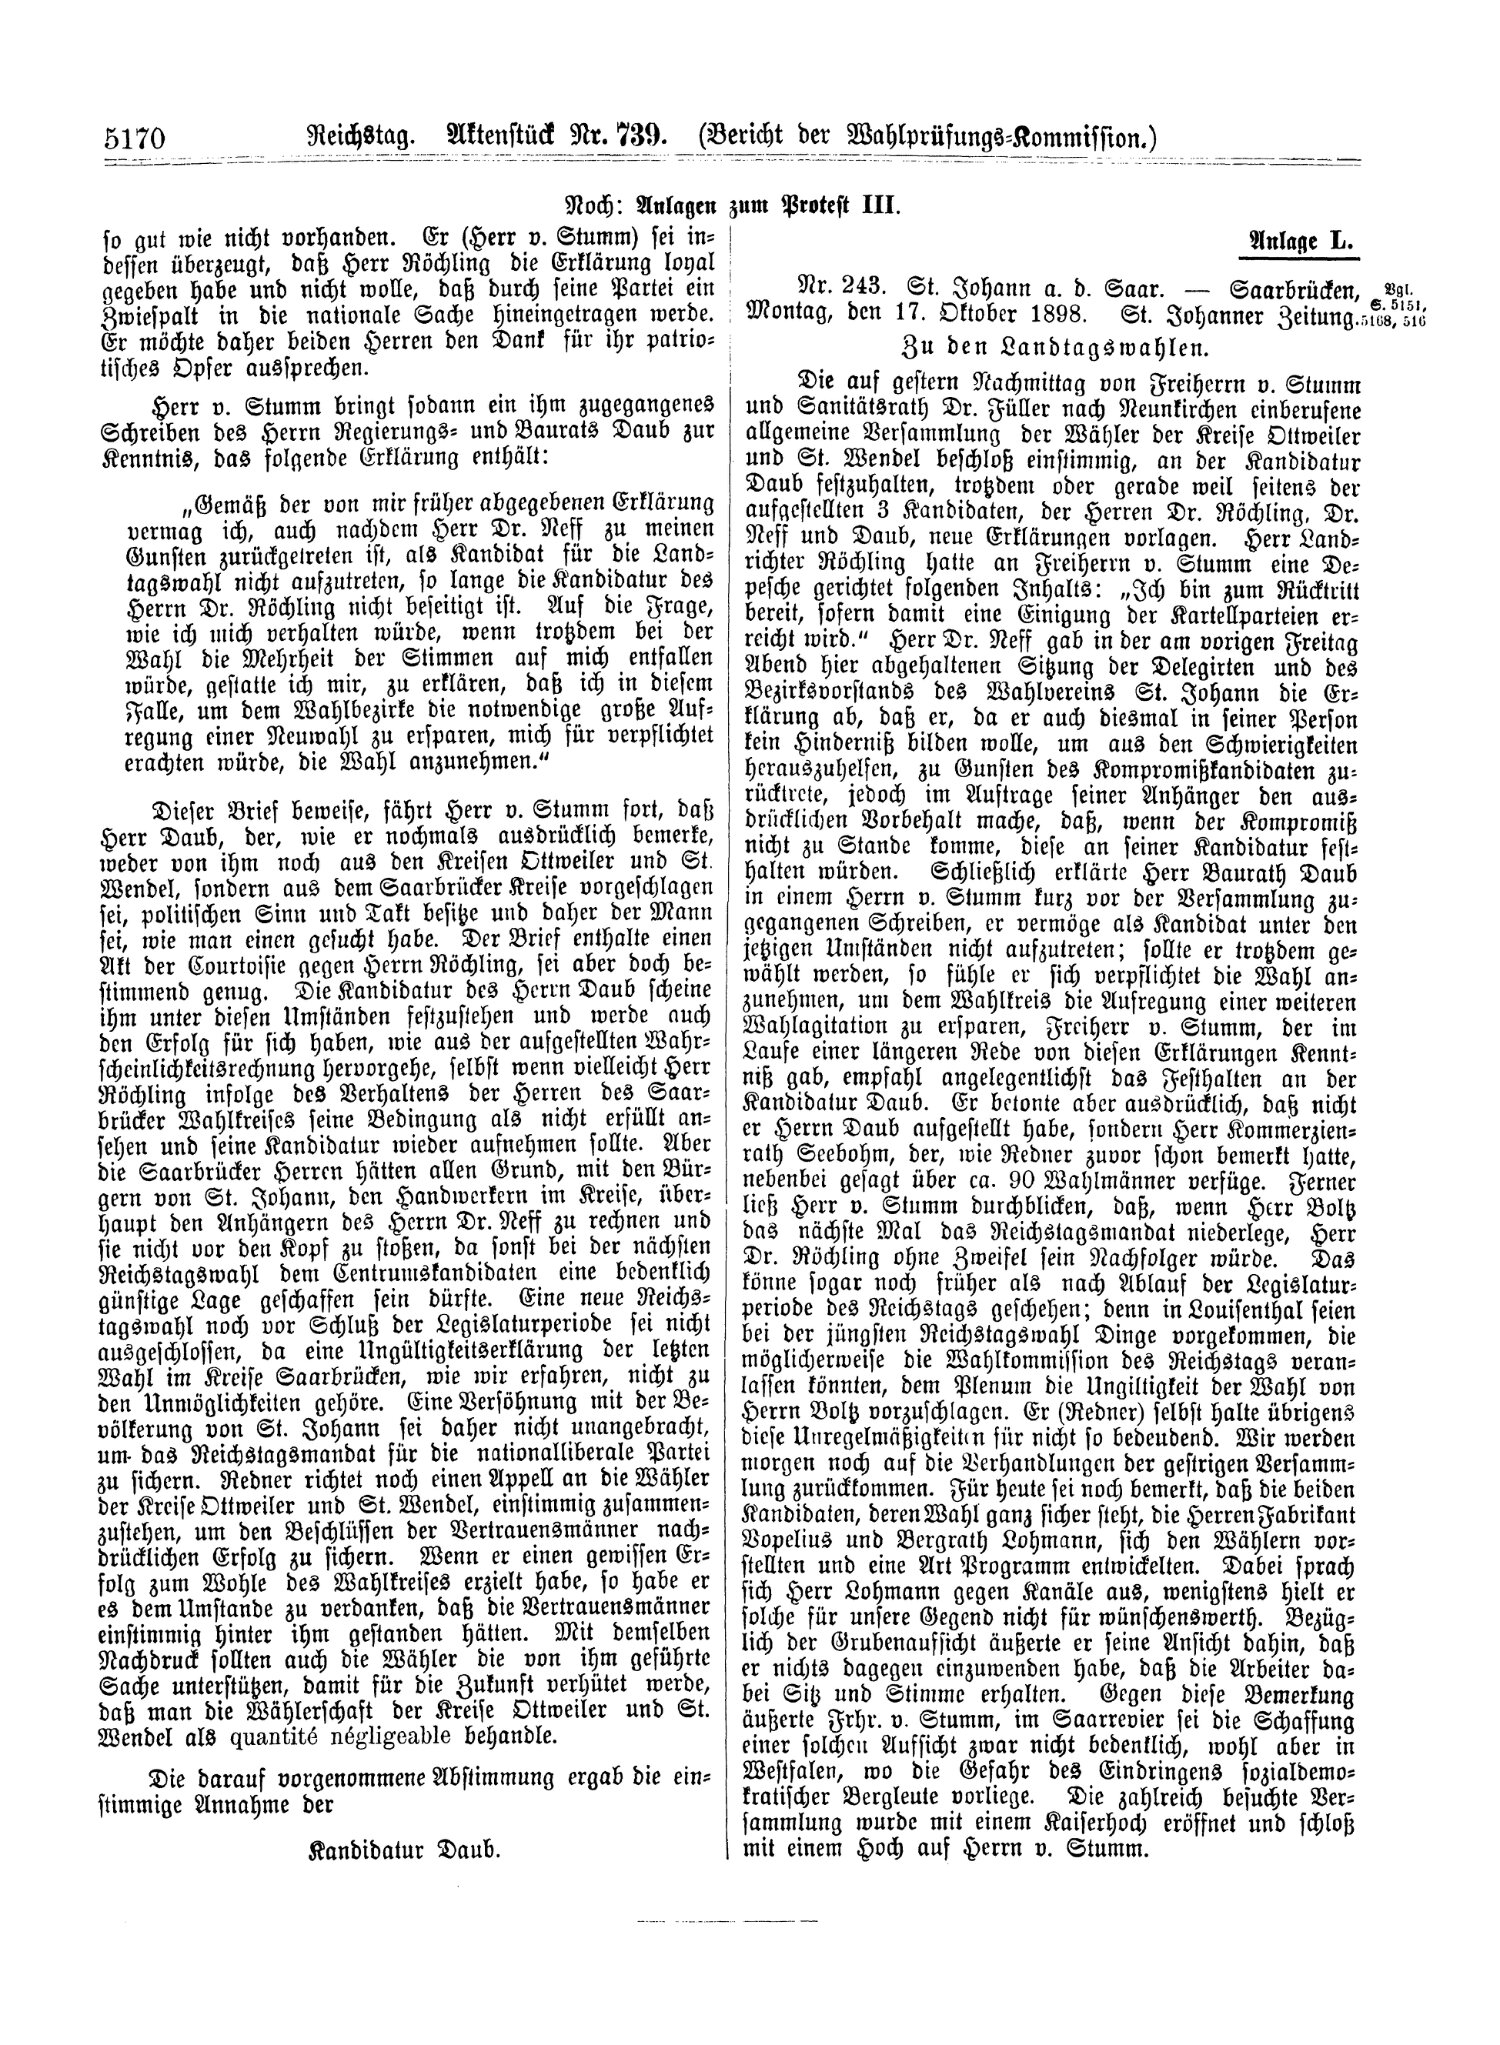 Scan of page 5170